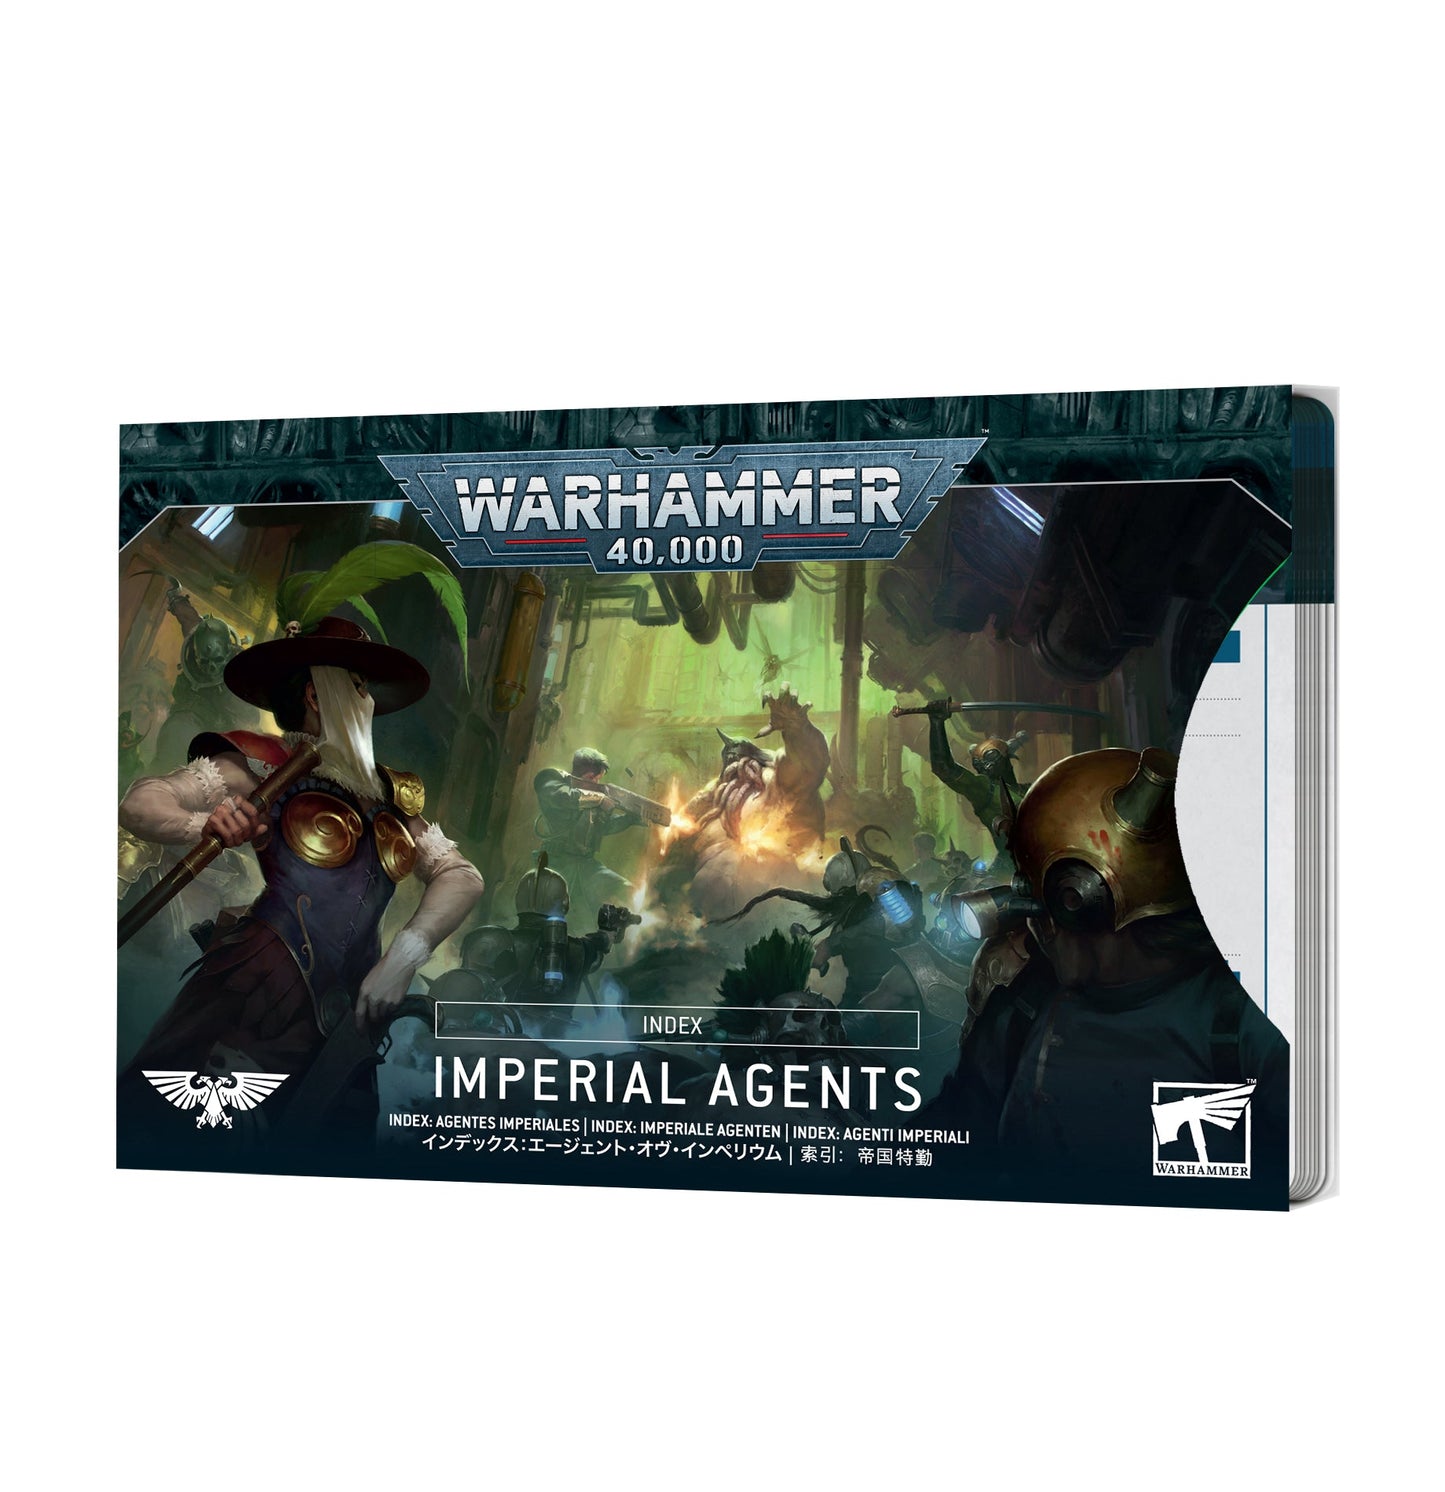 Warhammer 40K: Index - Imperial Agents (10th Edition) - Gamescape